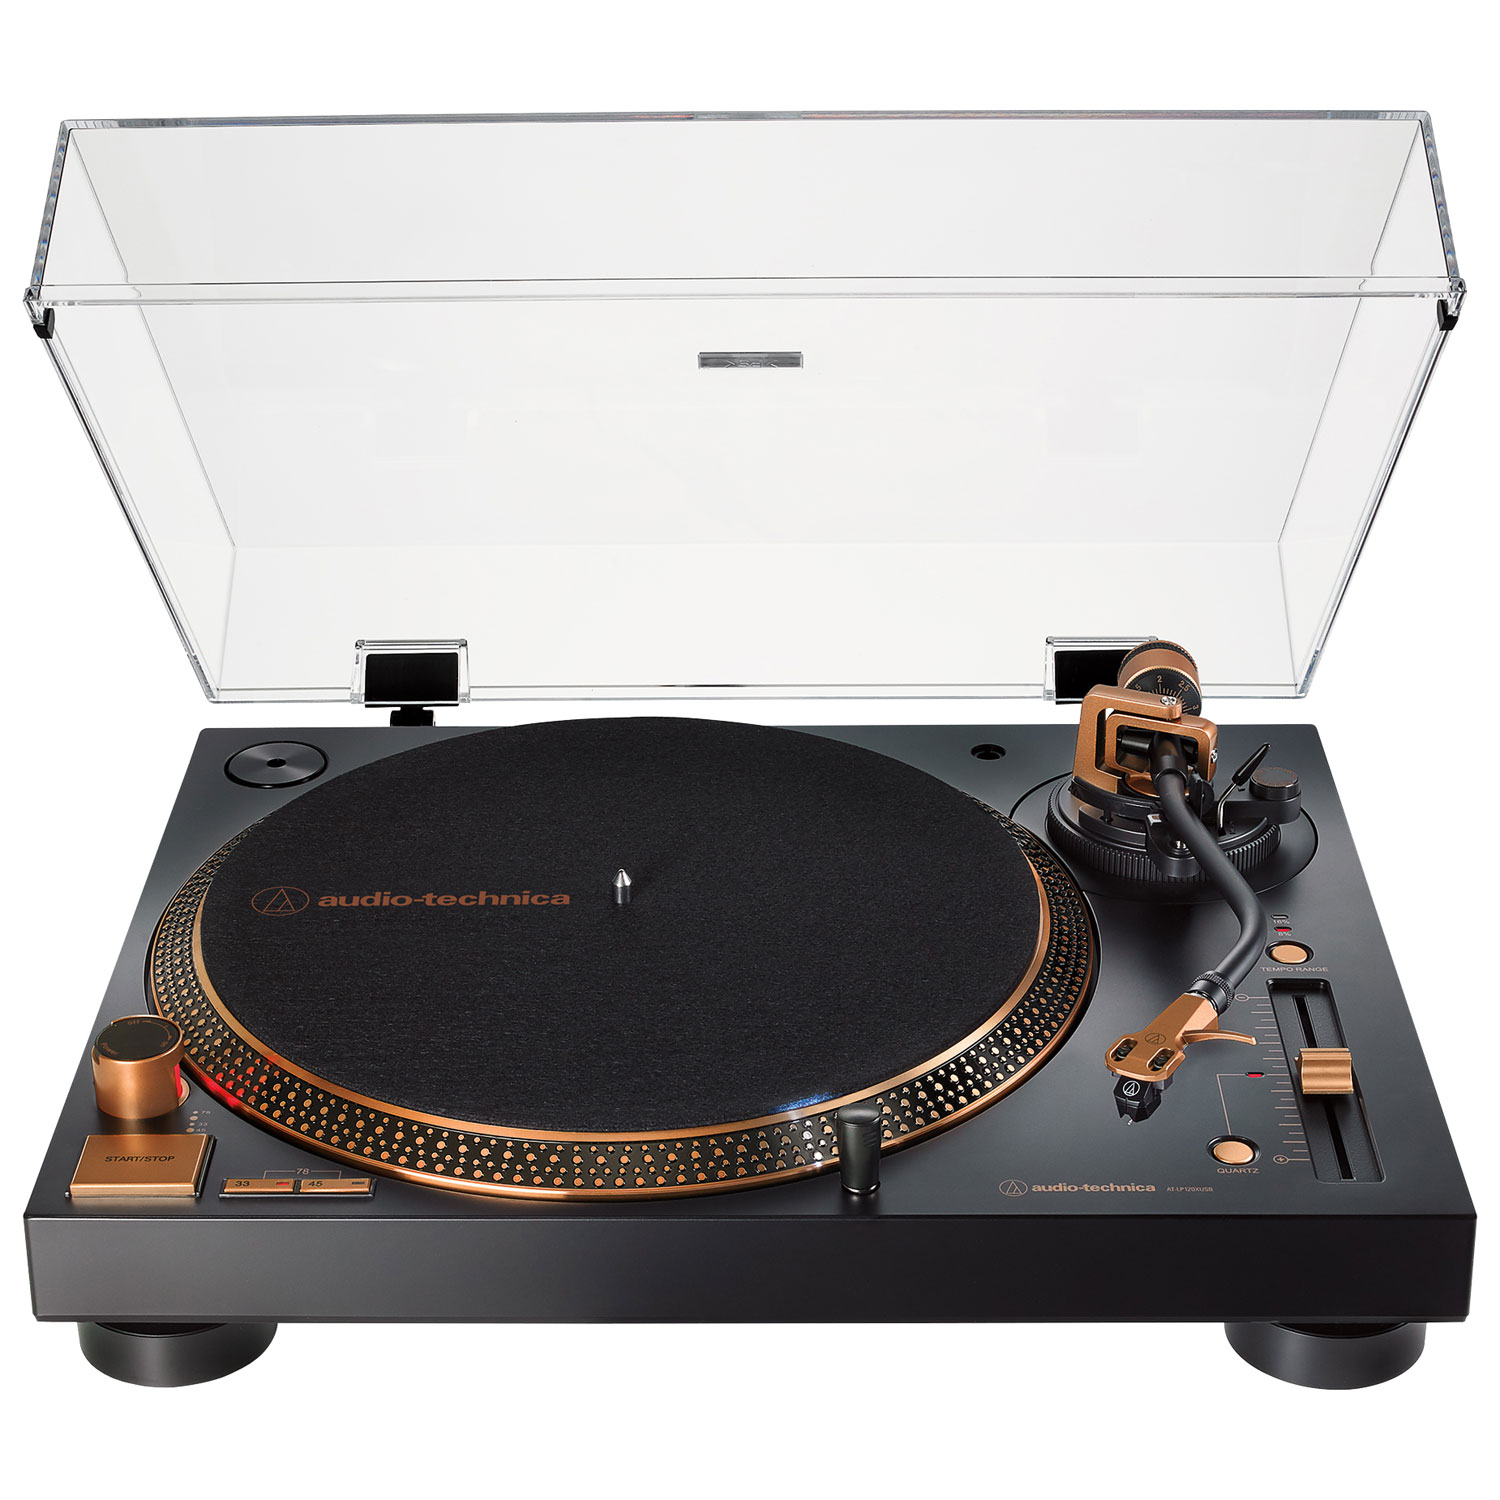 AT-LP120-USBHCDirect-Drive Professional Turntable